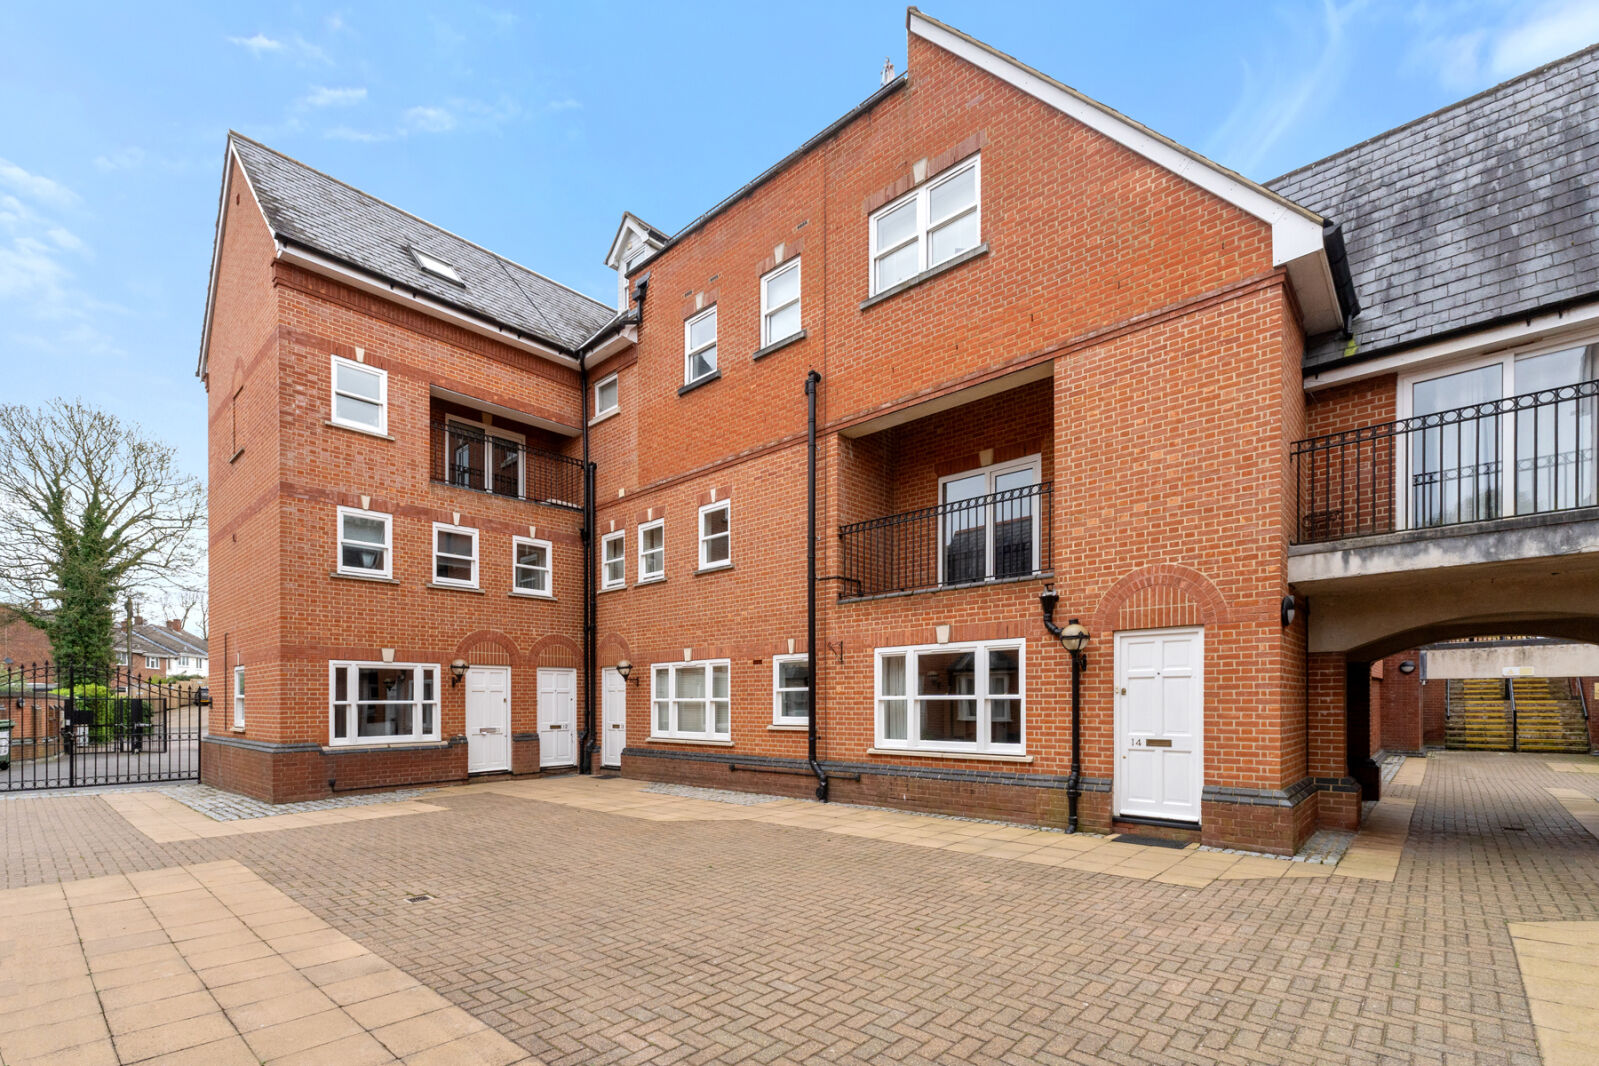 1 bedroom  flat for sale Bentfield Road, Stansted, CM24, main image